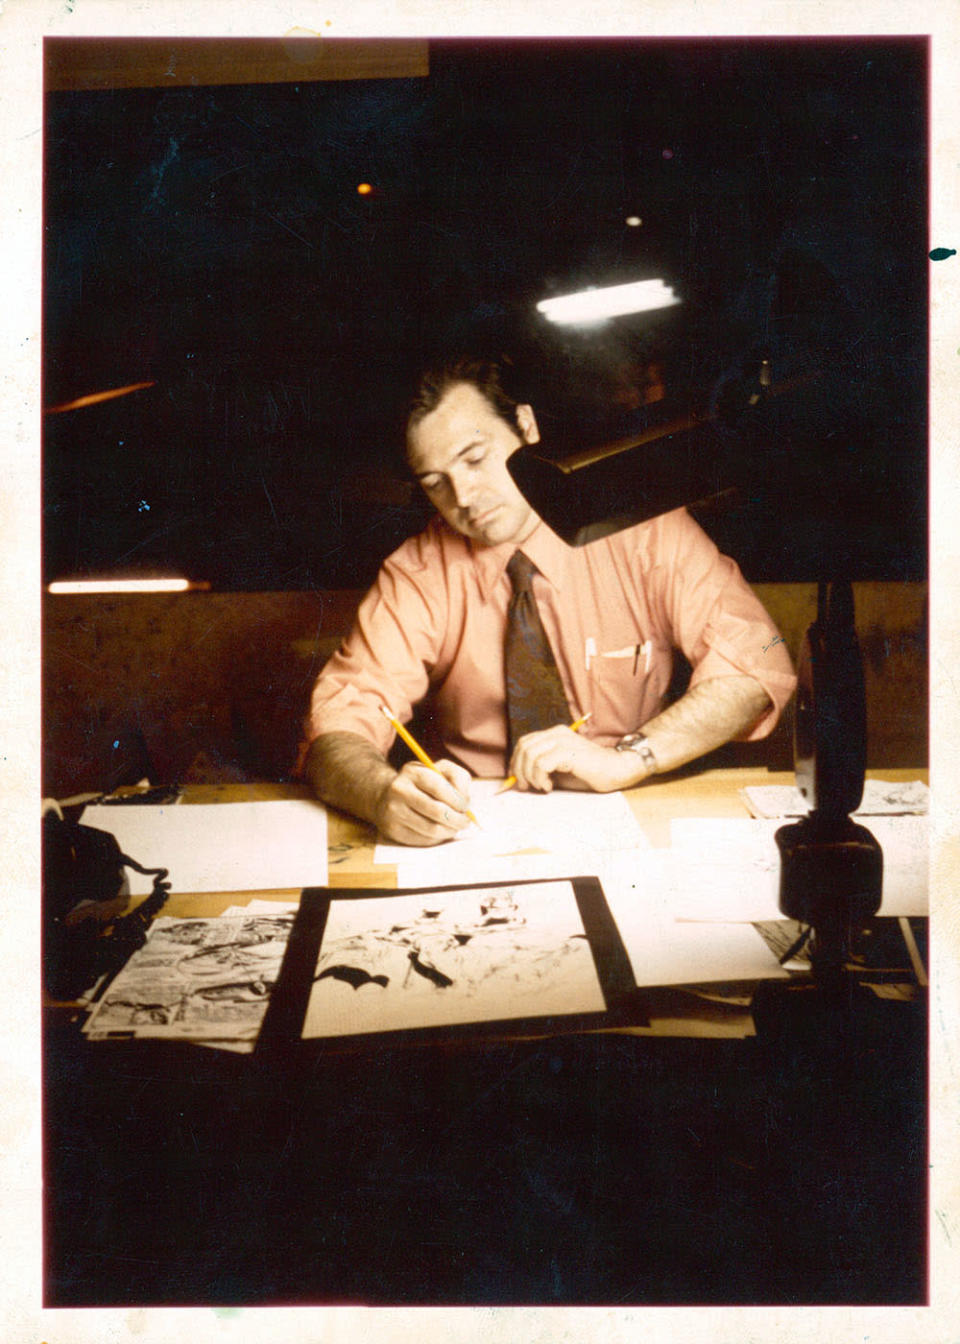 Neal Adams at work in the early 1970s - Credit: Courtesy of the Adams Family